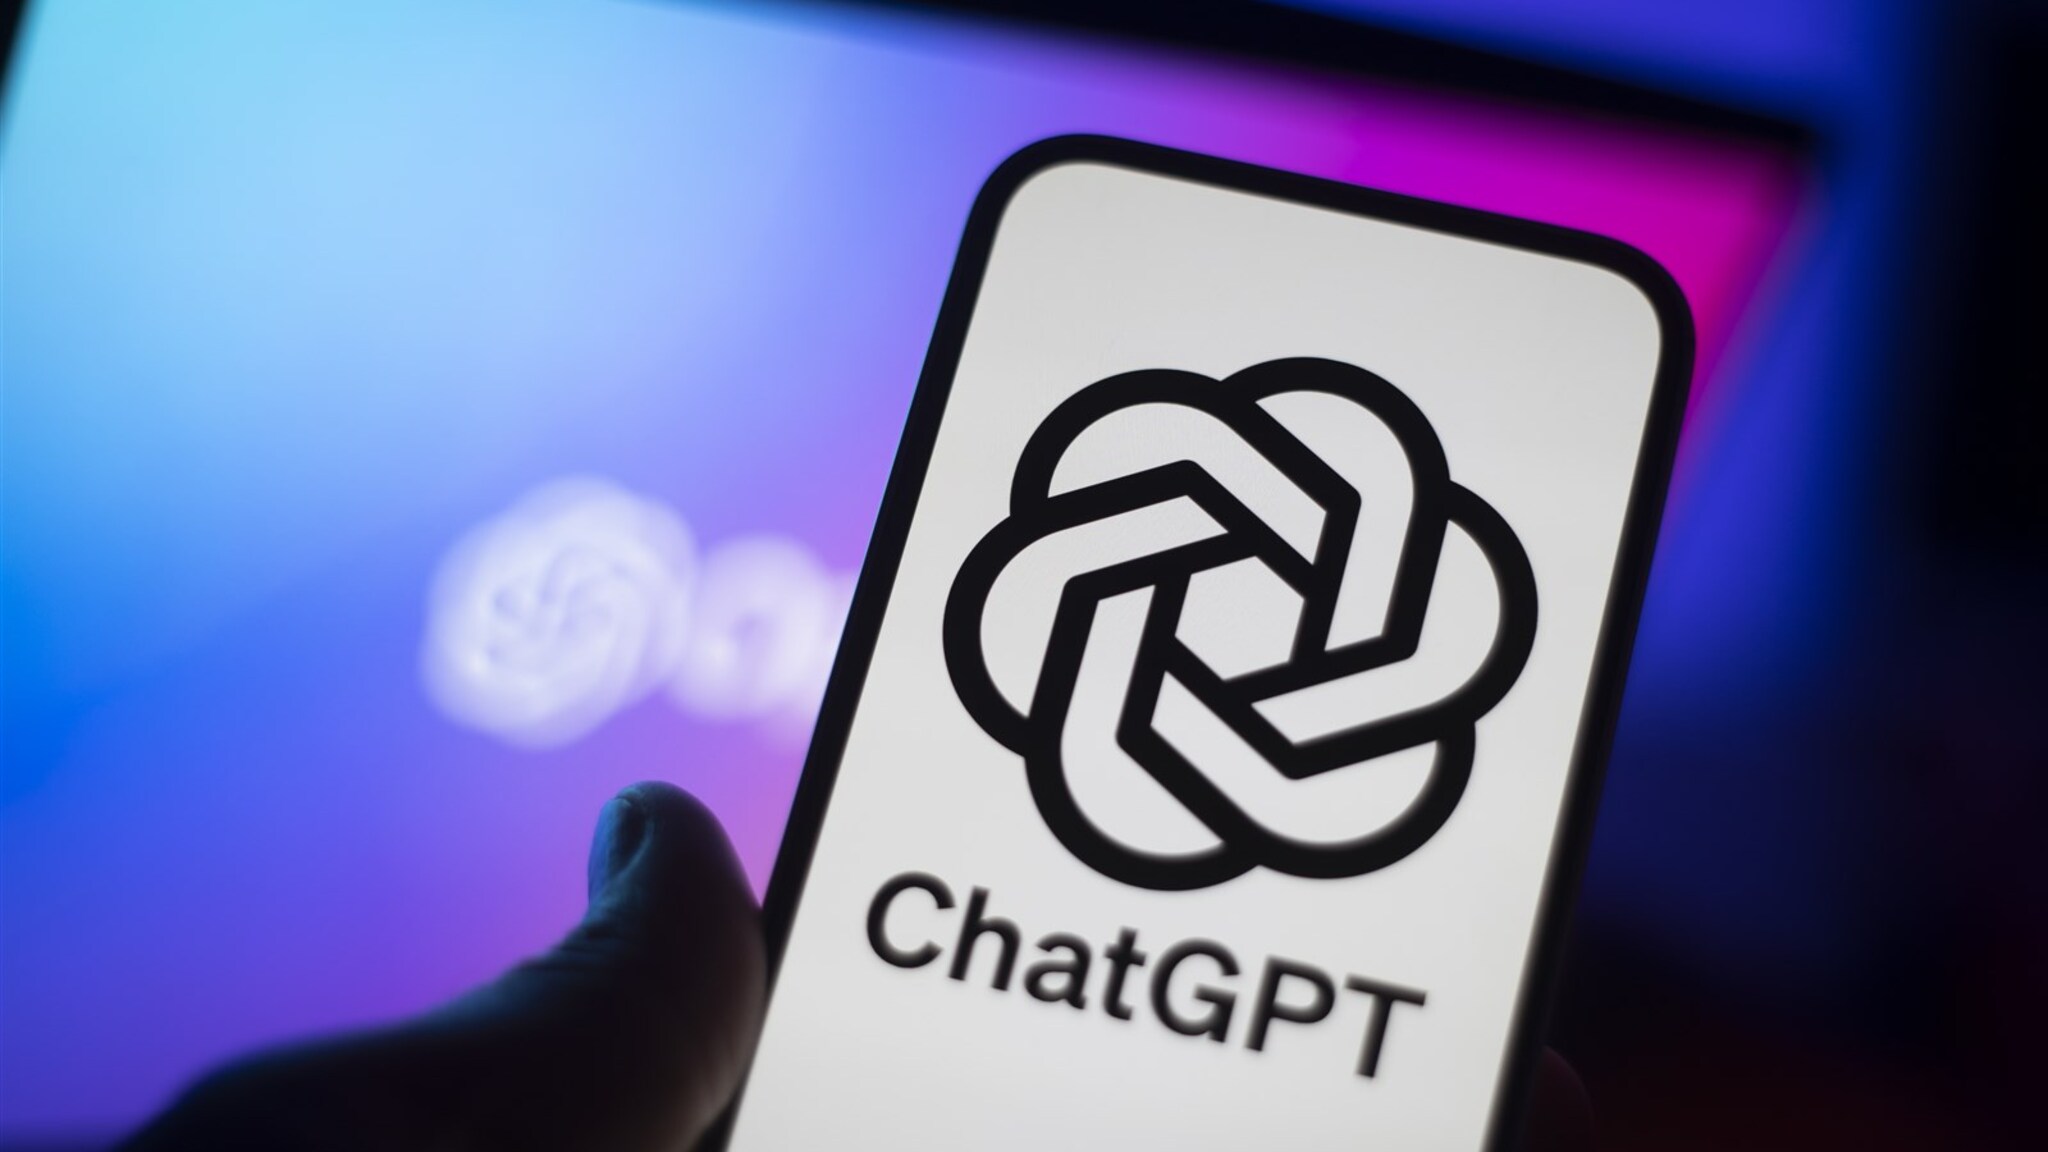 ChatGPT Mobile App Sets Revenue Record Of $4.58M In September, But Growth Slows